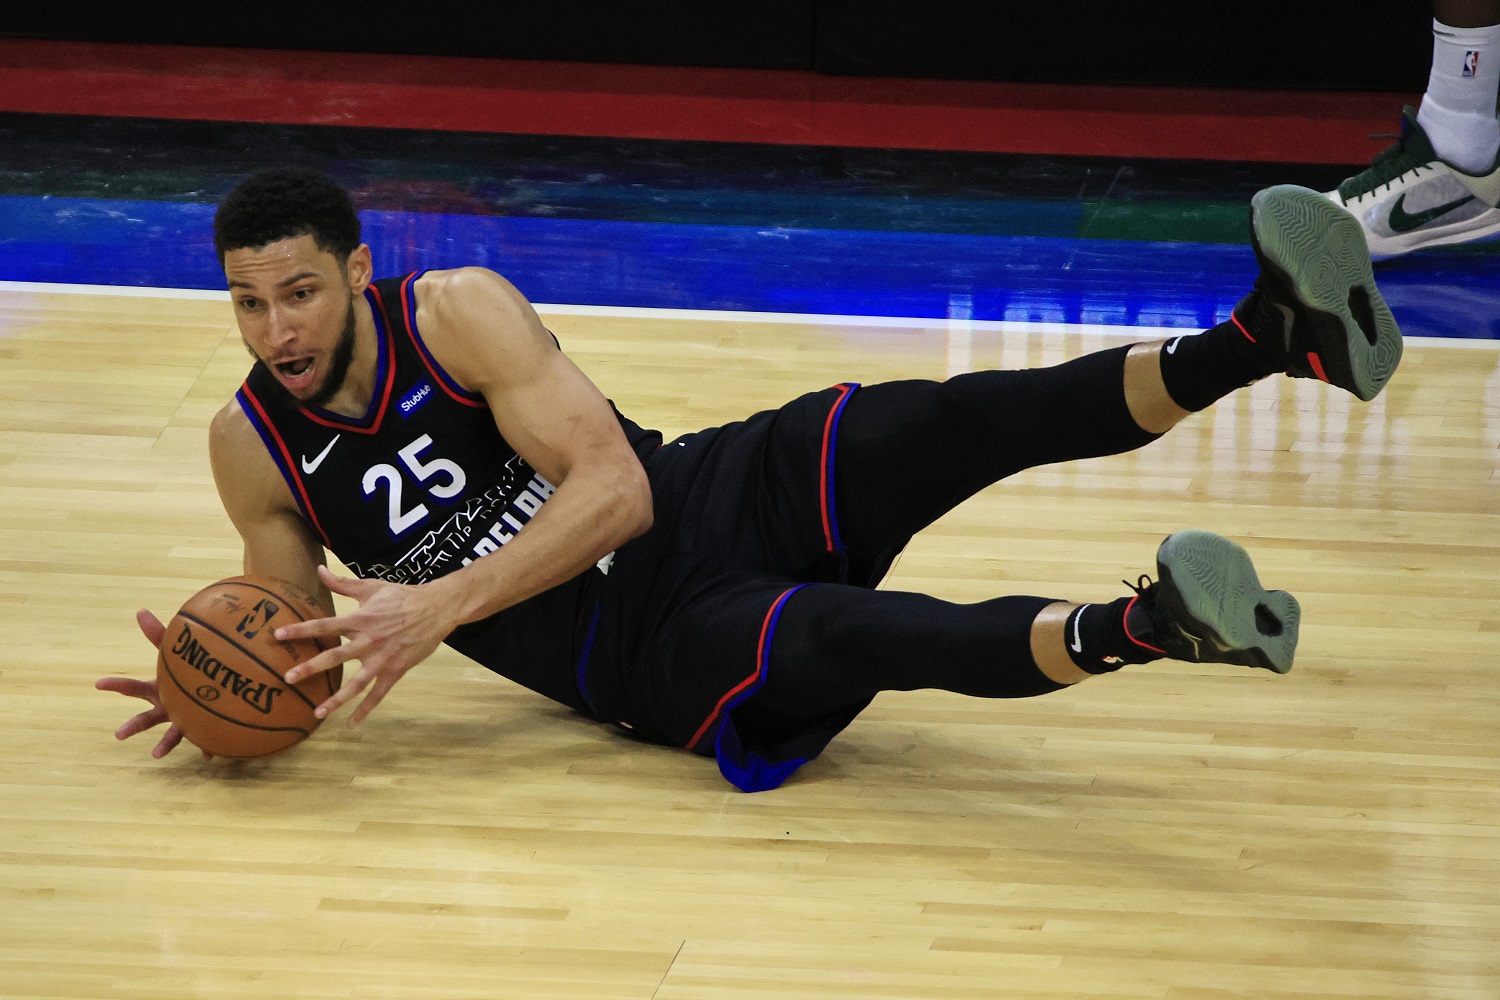 Former No. 1 draft pick Ben Simmons is in his fourth season with the Philadelphia 76ers. |  Corey Perrine/Getty Images